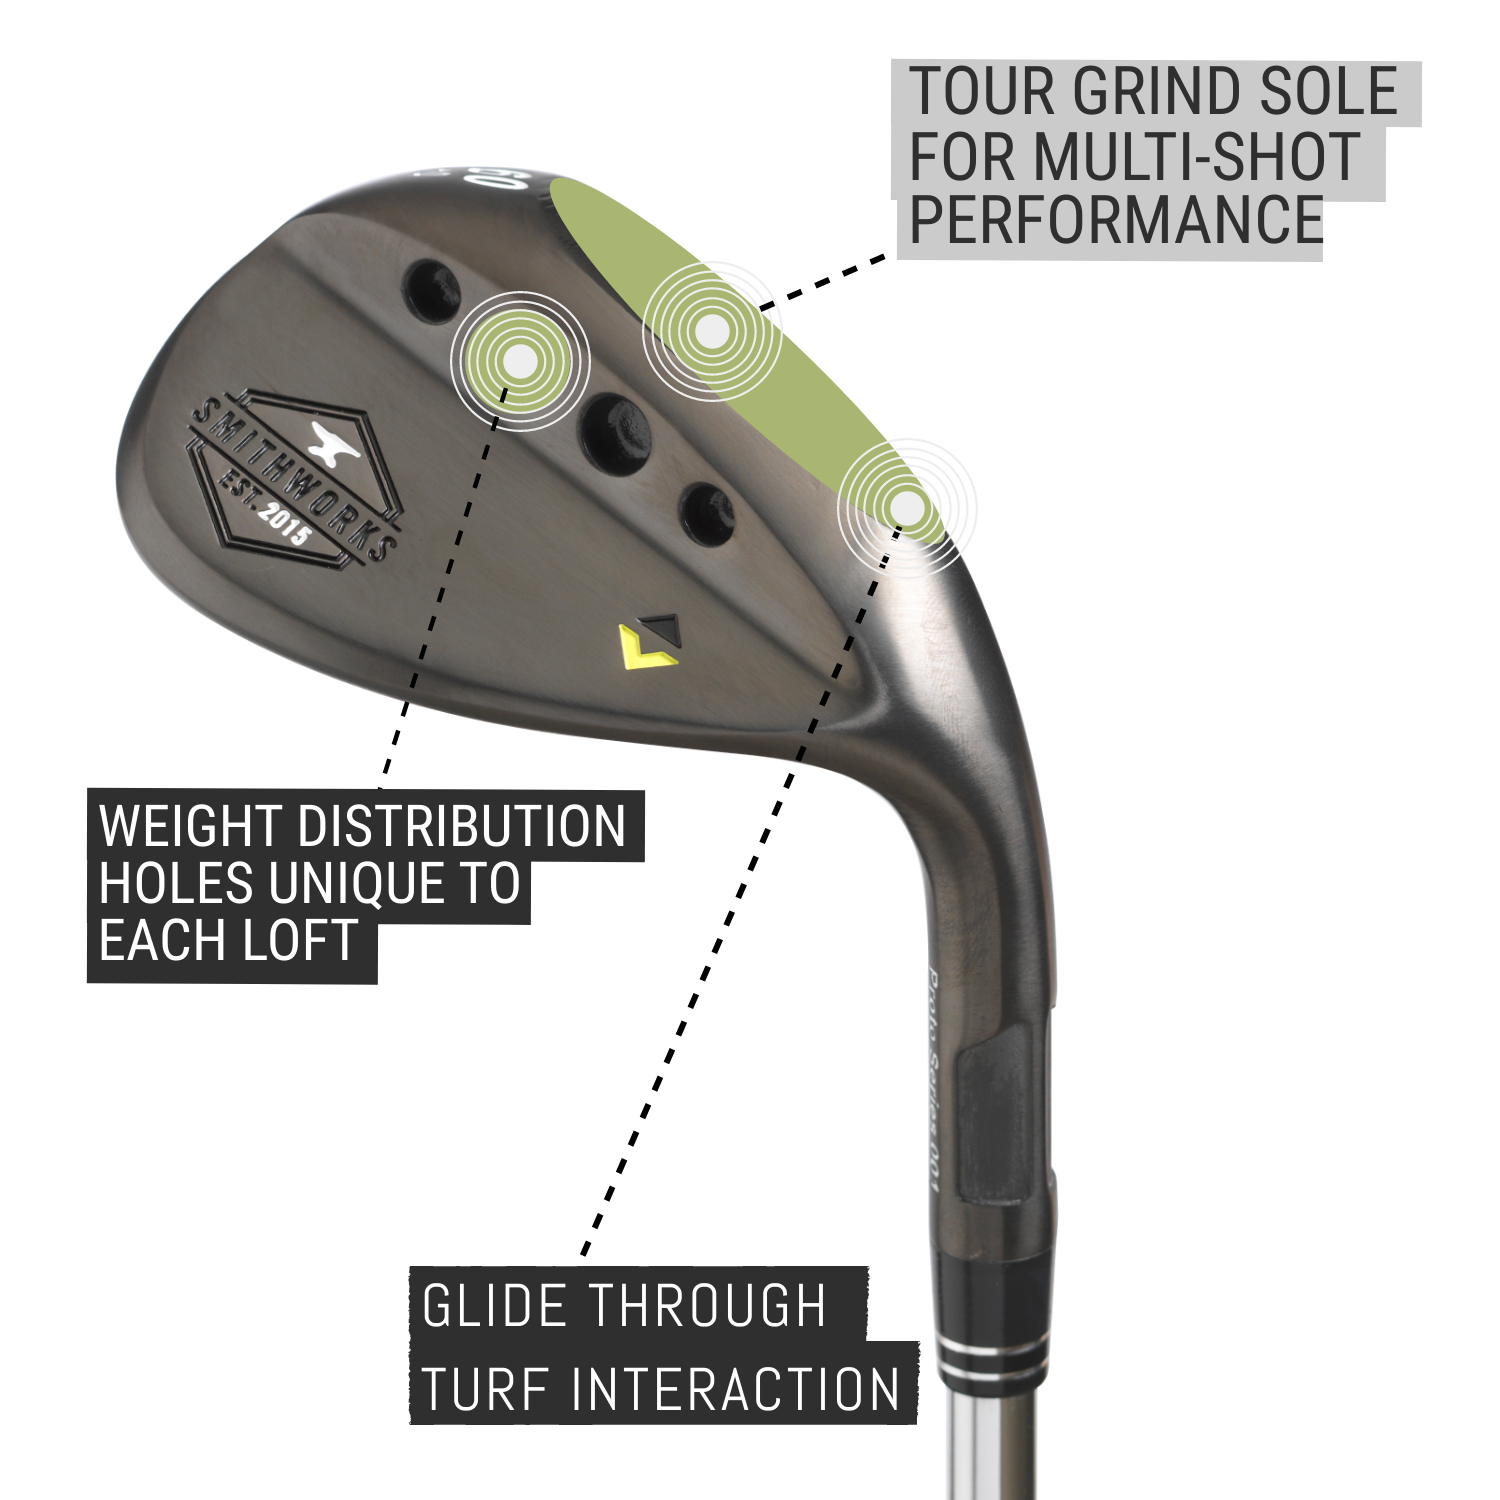 This picture shows the tour grind of SmithWorks wedges